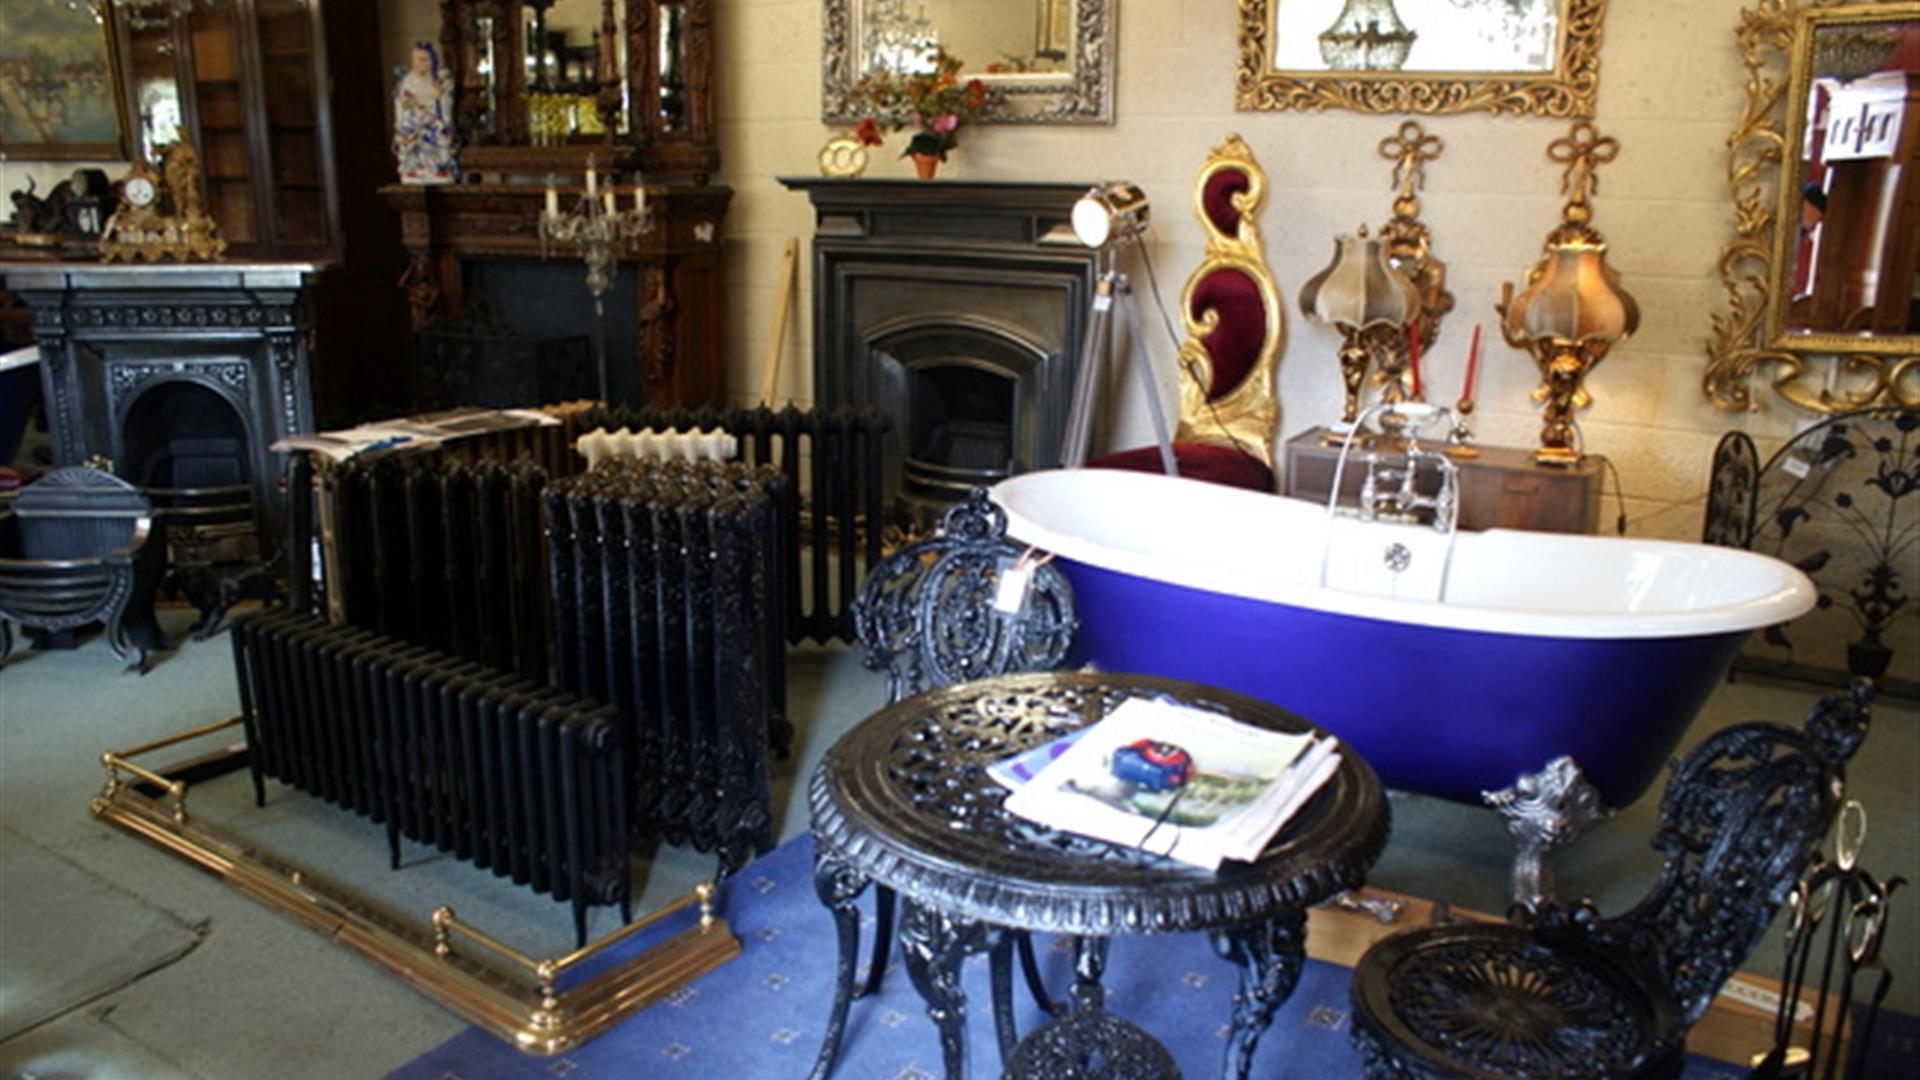 picture showing an old bathtub, radiator, table and chairs and other antiques